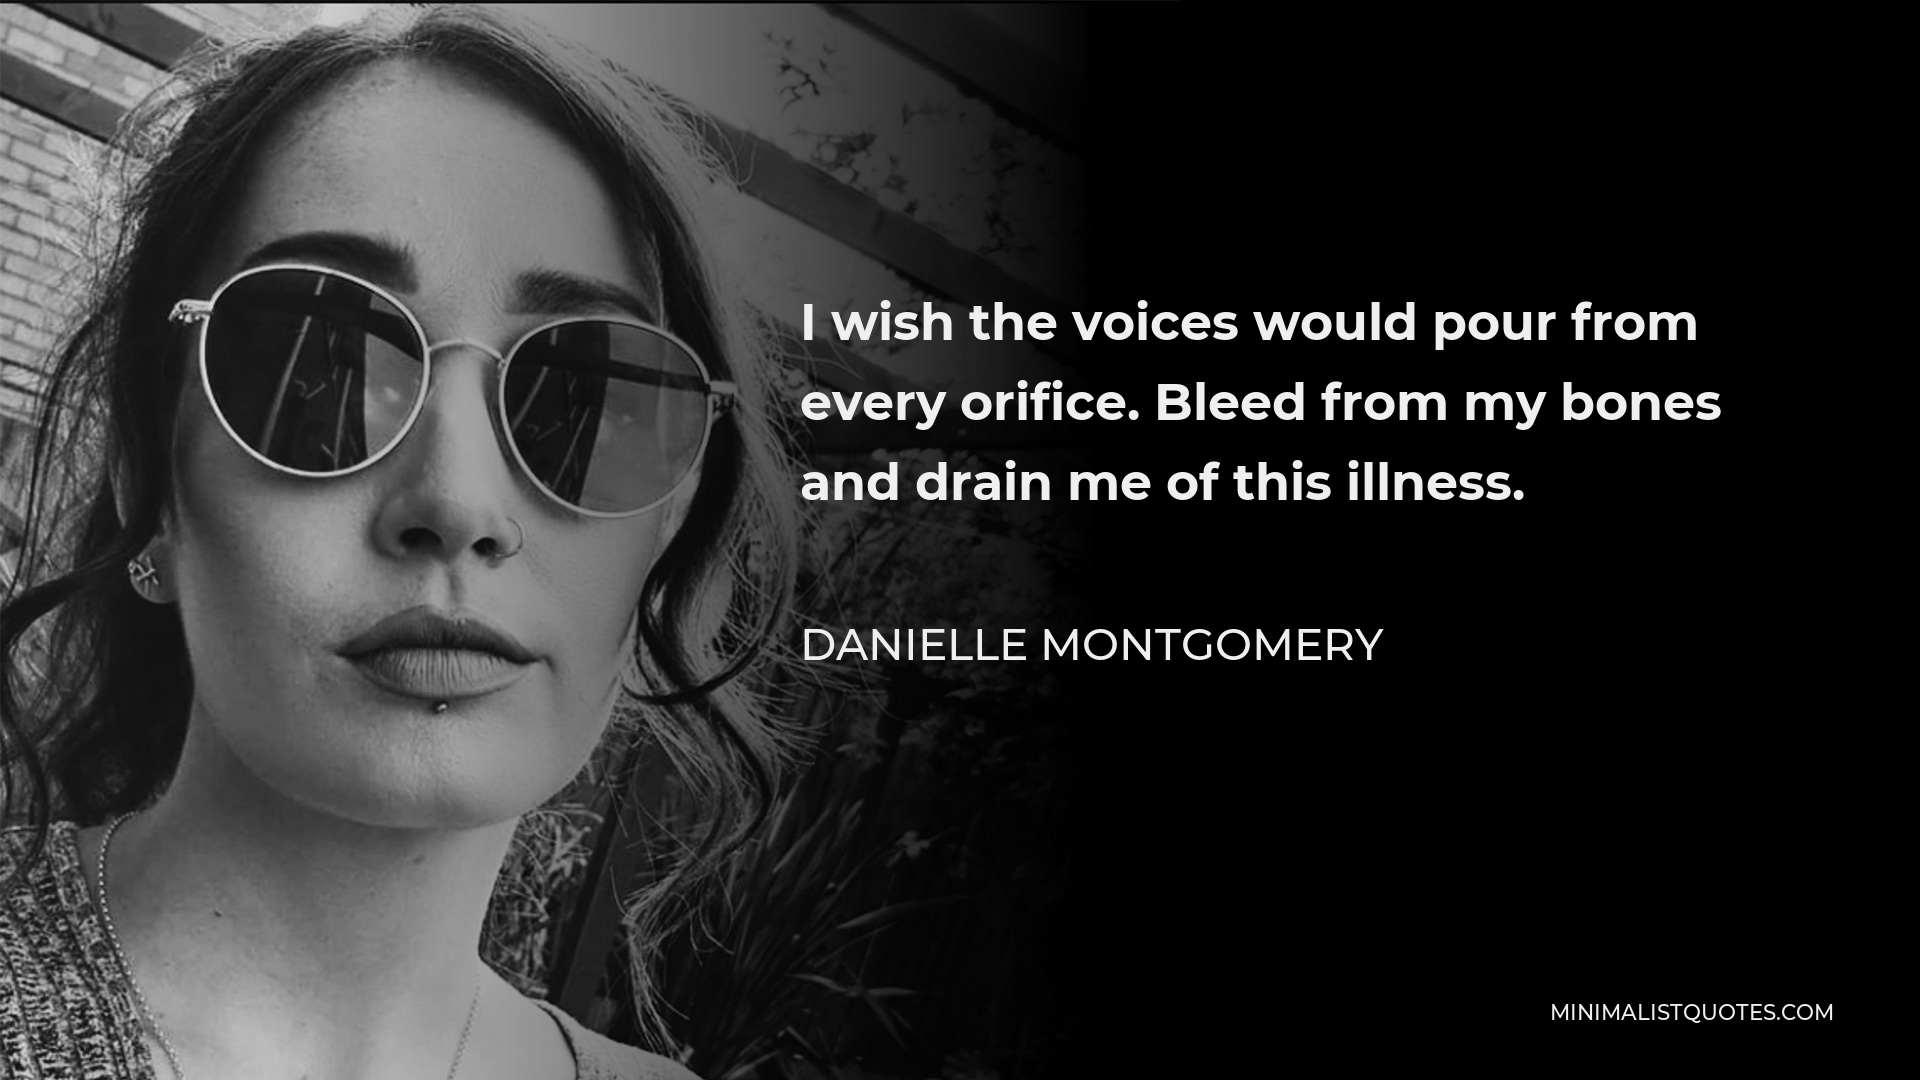 Danielle Montgomery Quote - I wish the voices would pour from every orifice. Bleed from my bones and drain me of this illness.